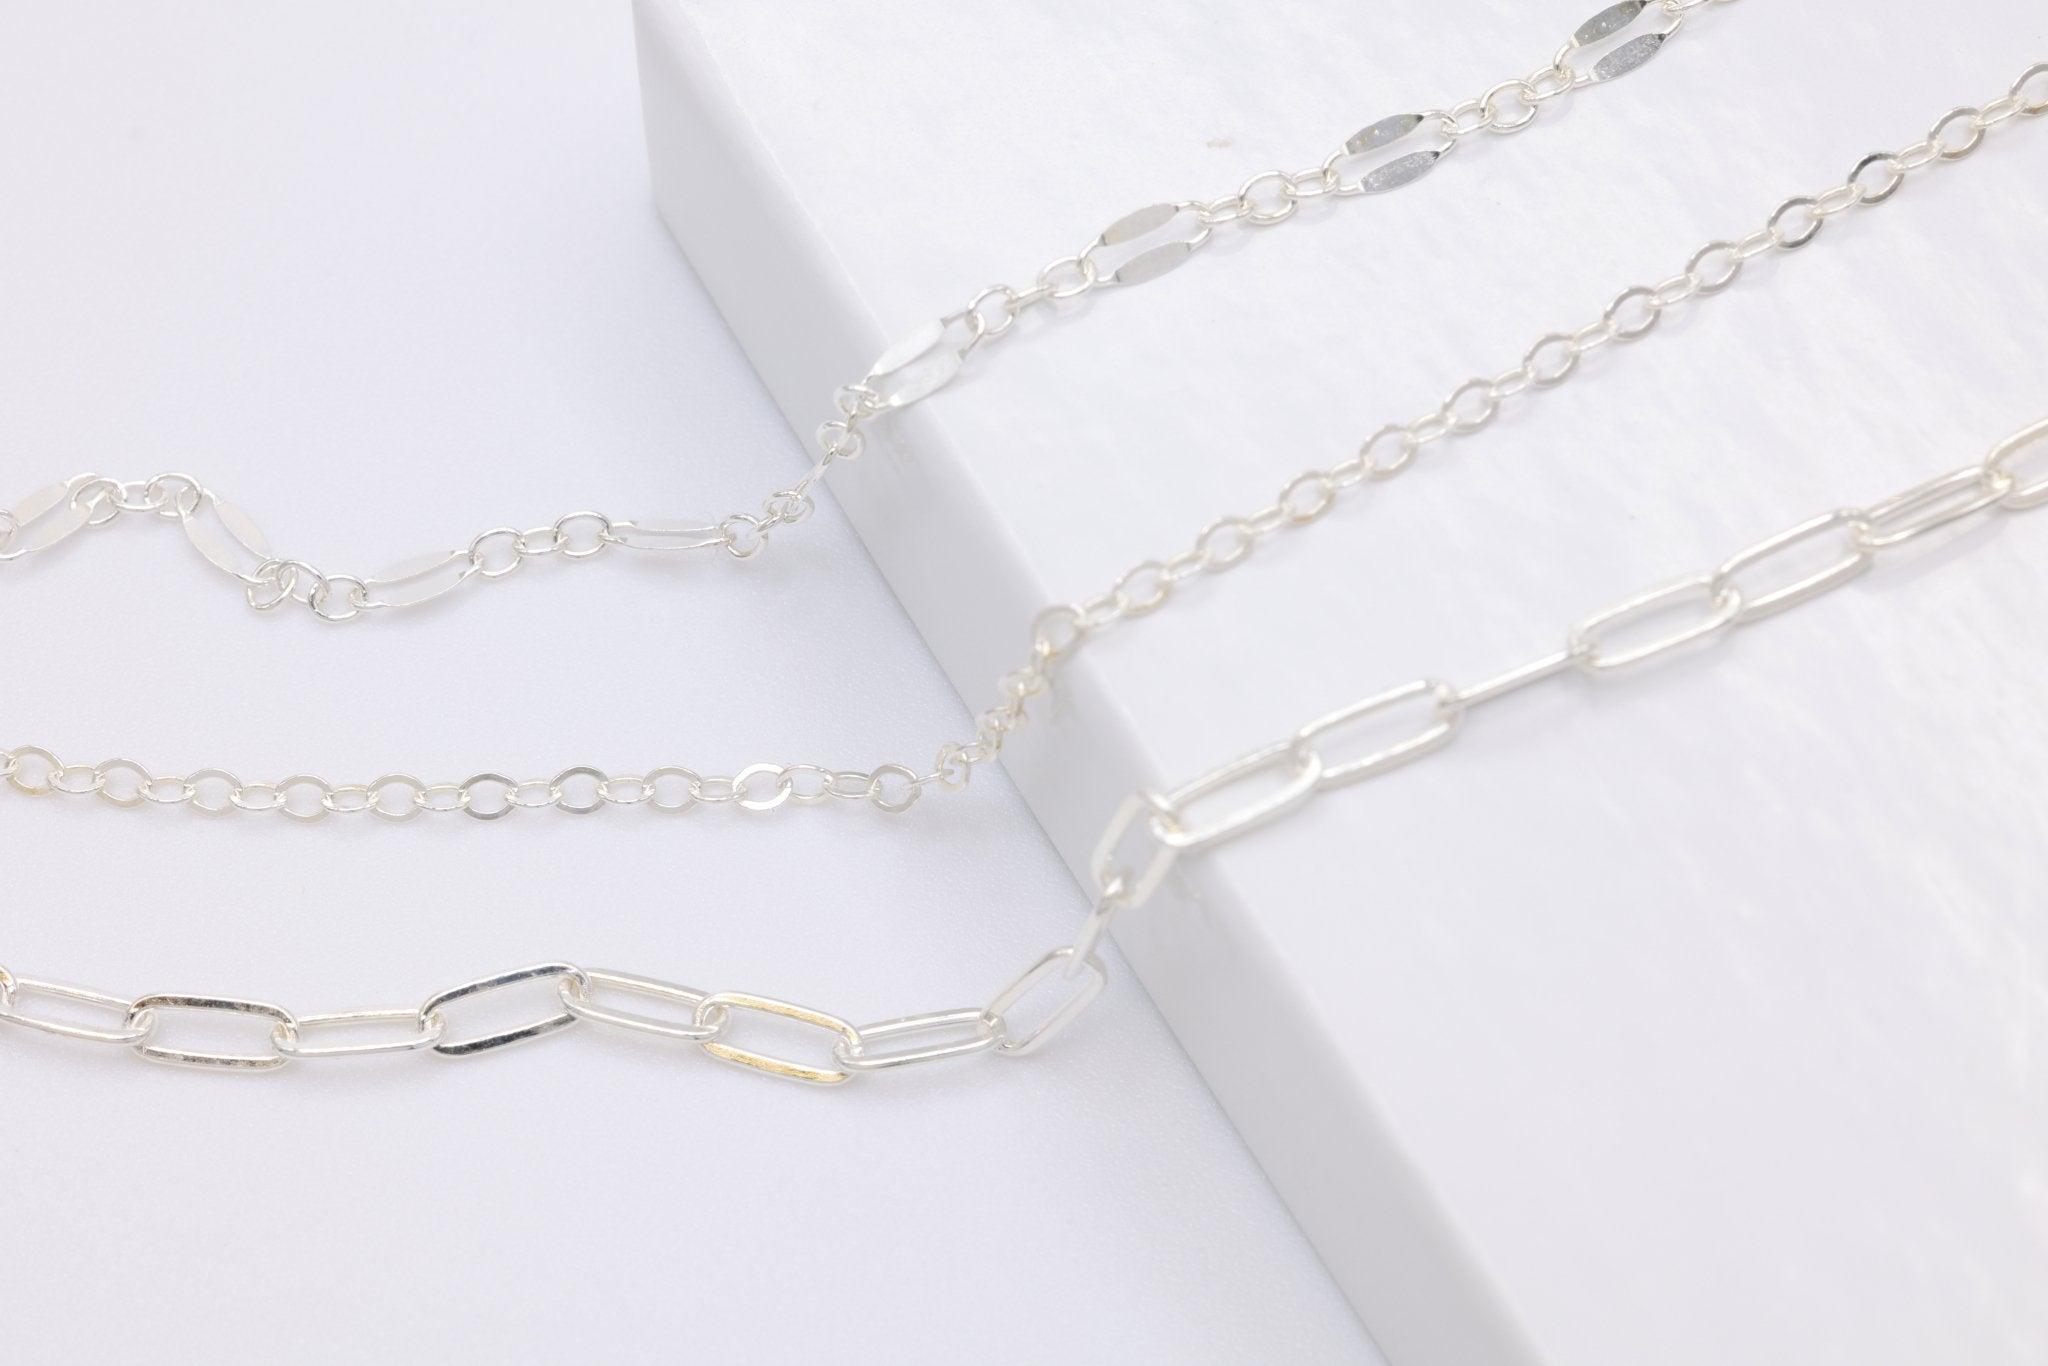 Wholesale Sterling Silver Jewelry Chain - HarperCrown